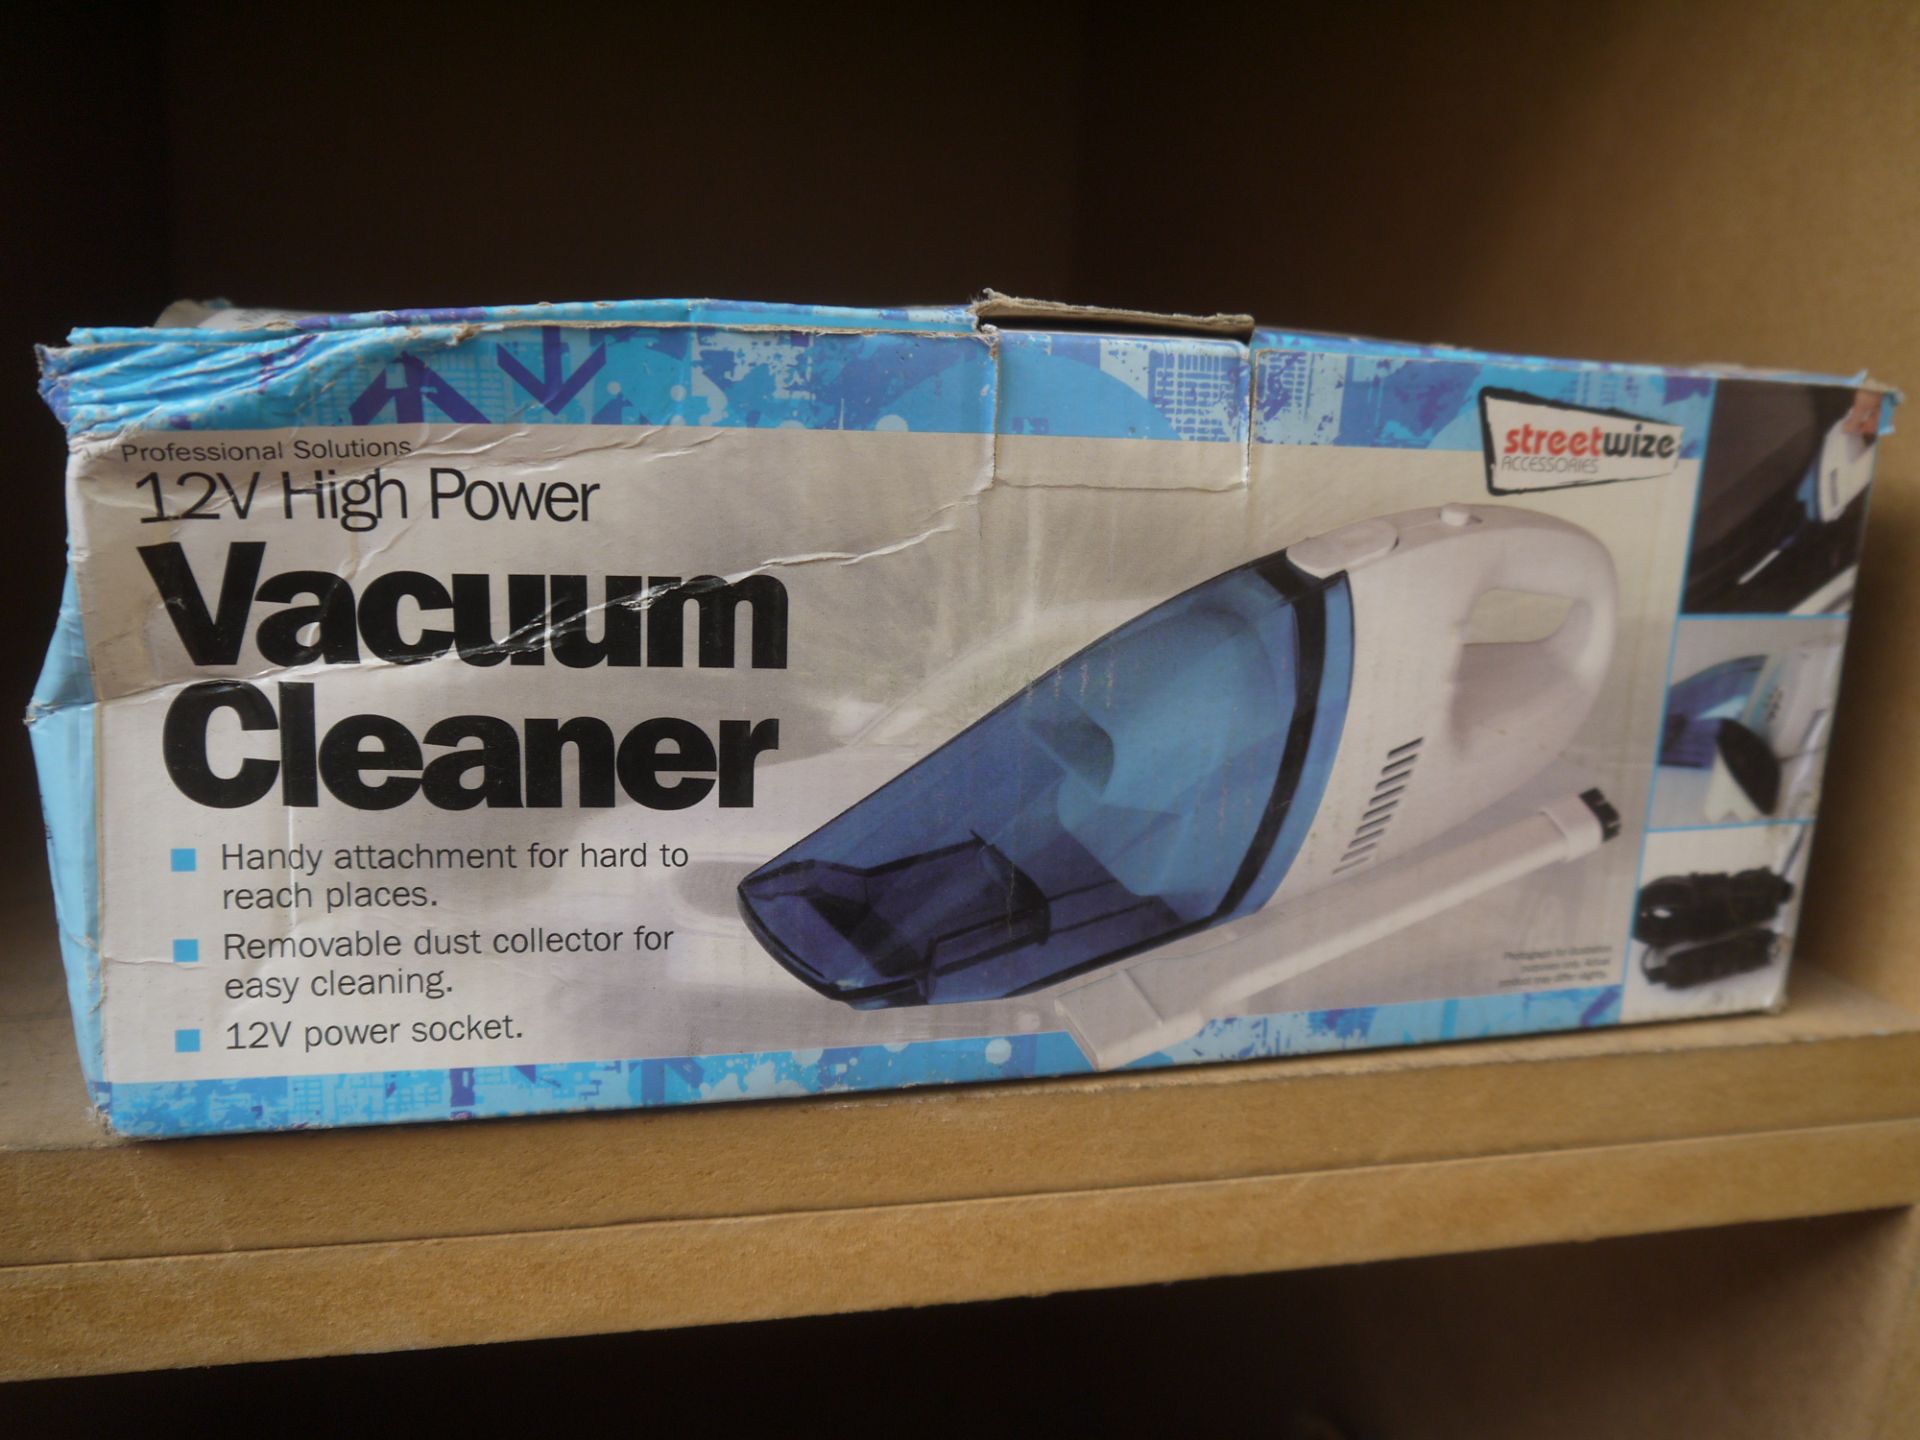 2x StreetWize 12V Vacuum Cleaner. Boxed.